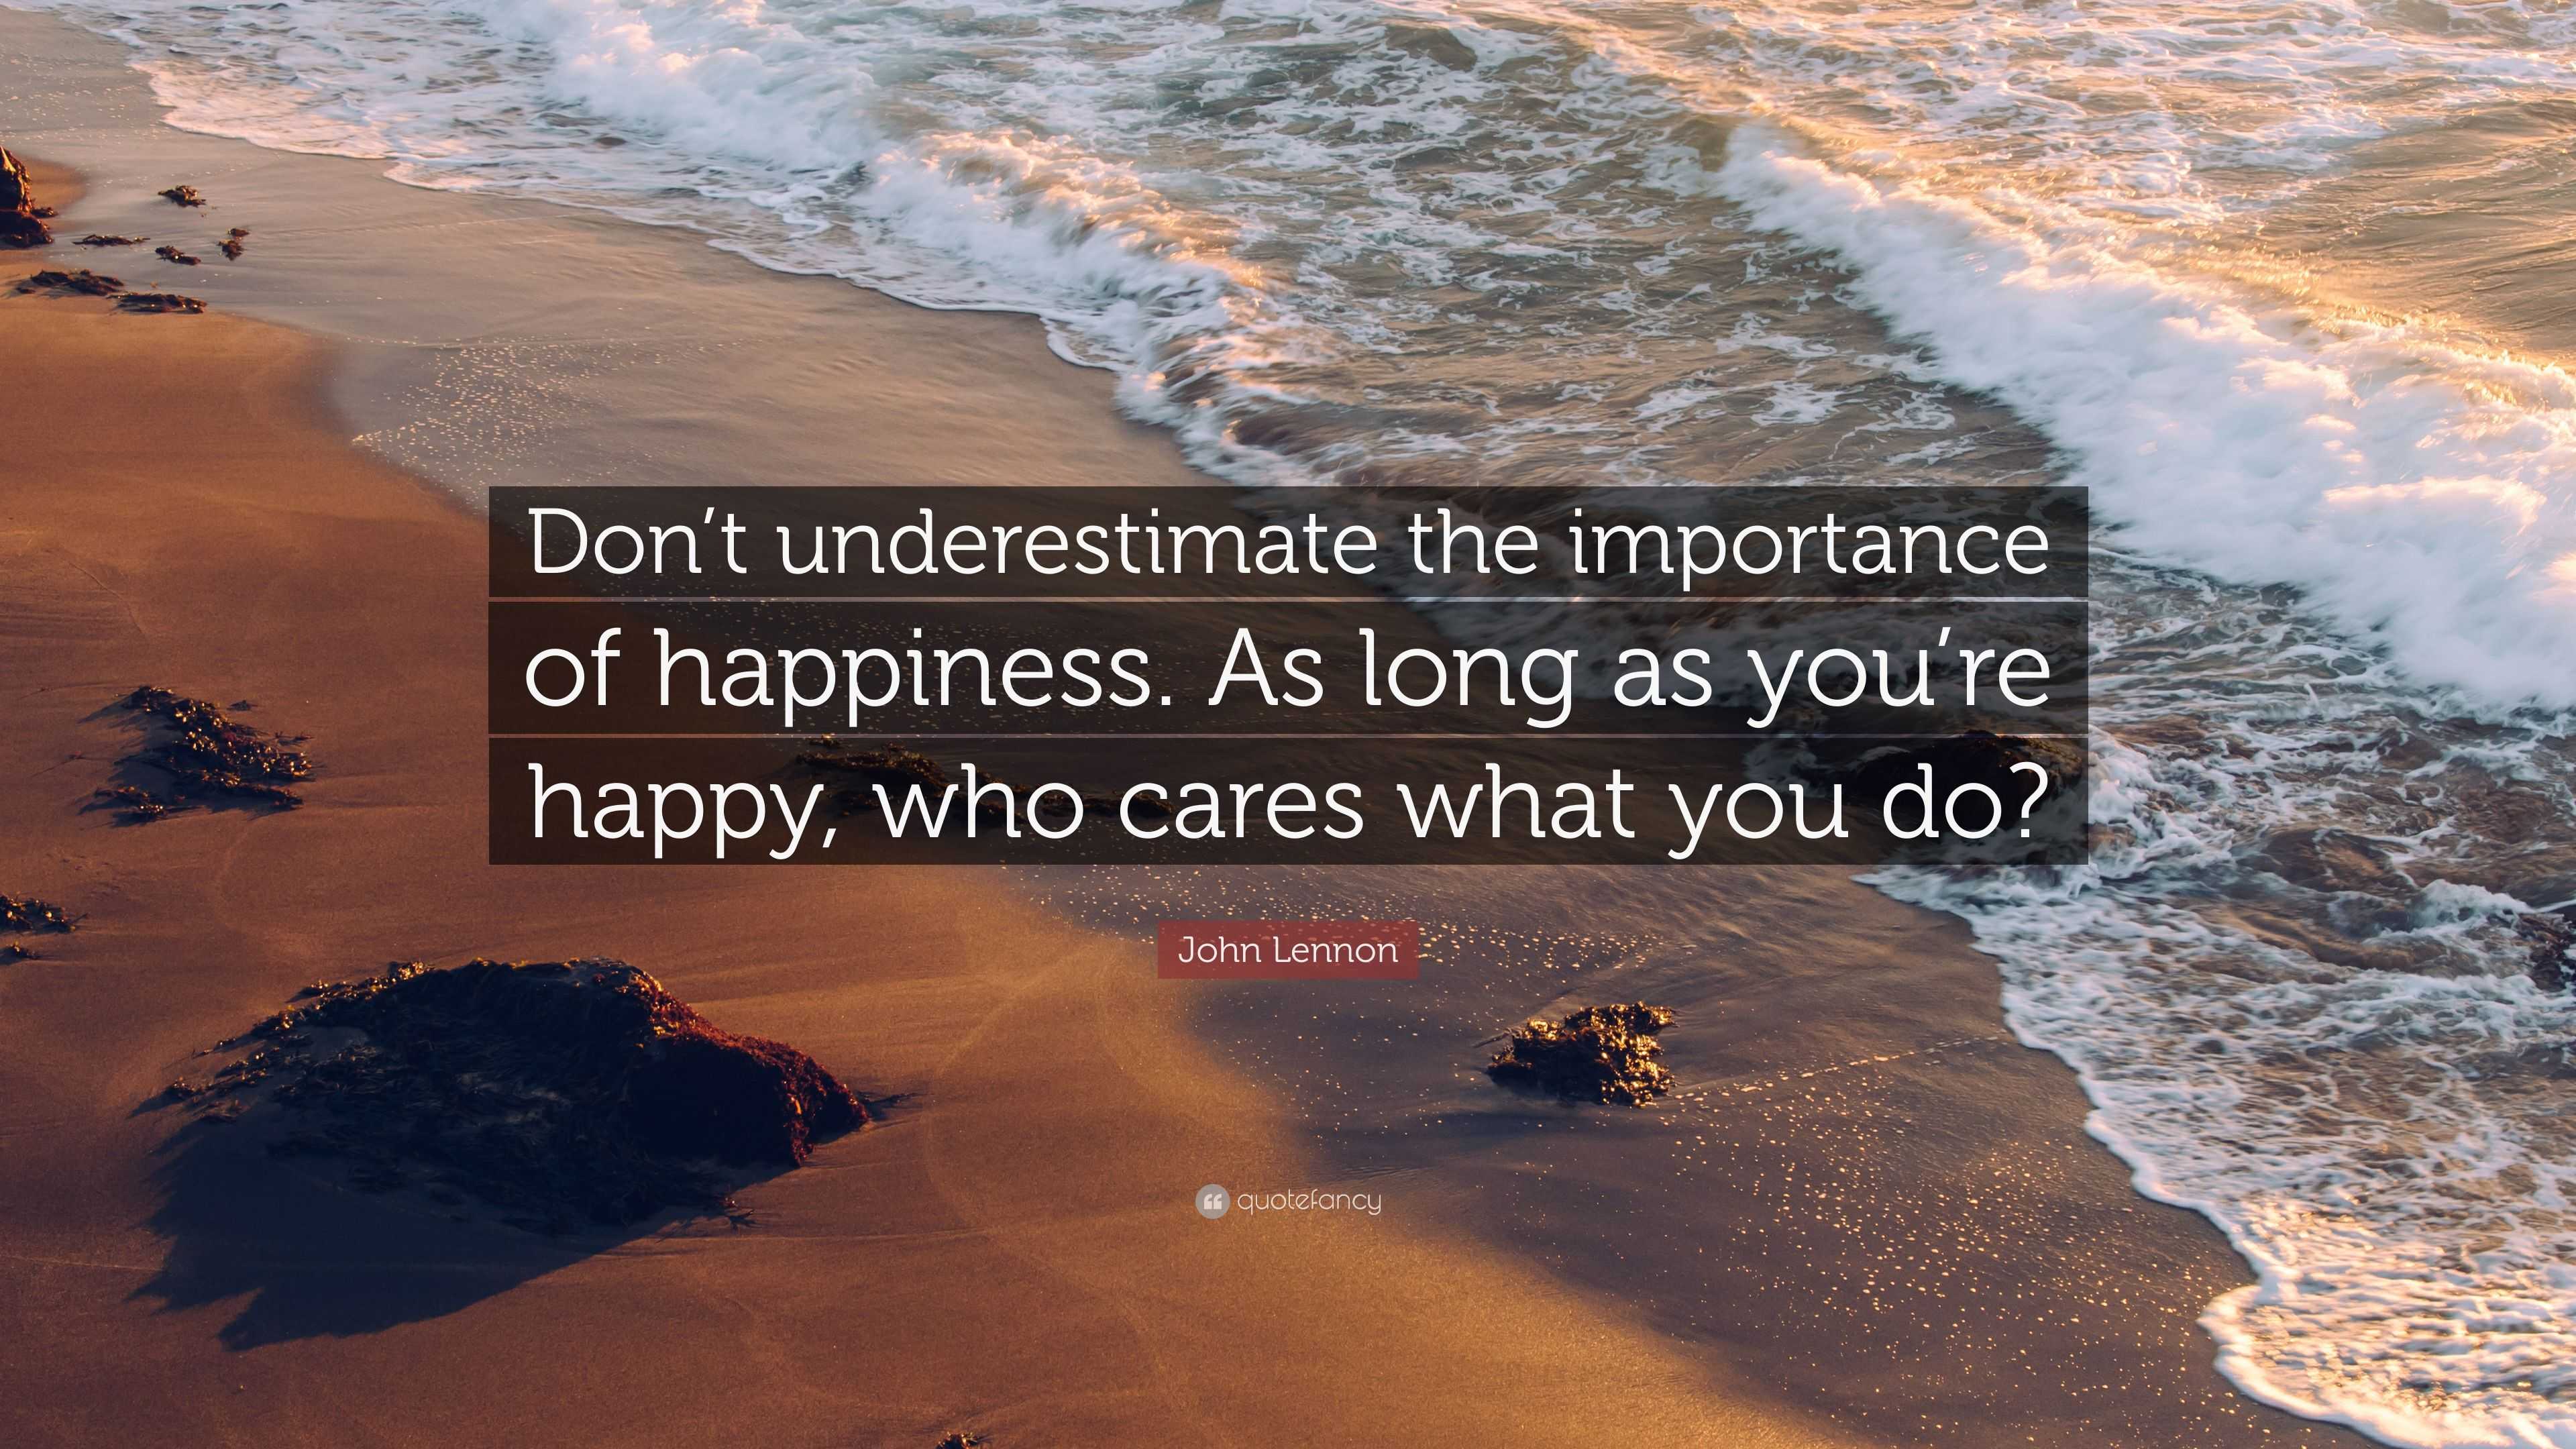 John Lennon Quote: “Don't underestimate the importance of